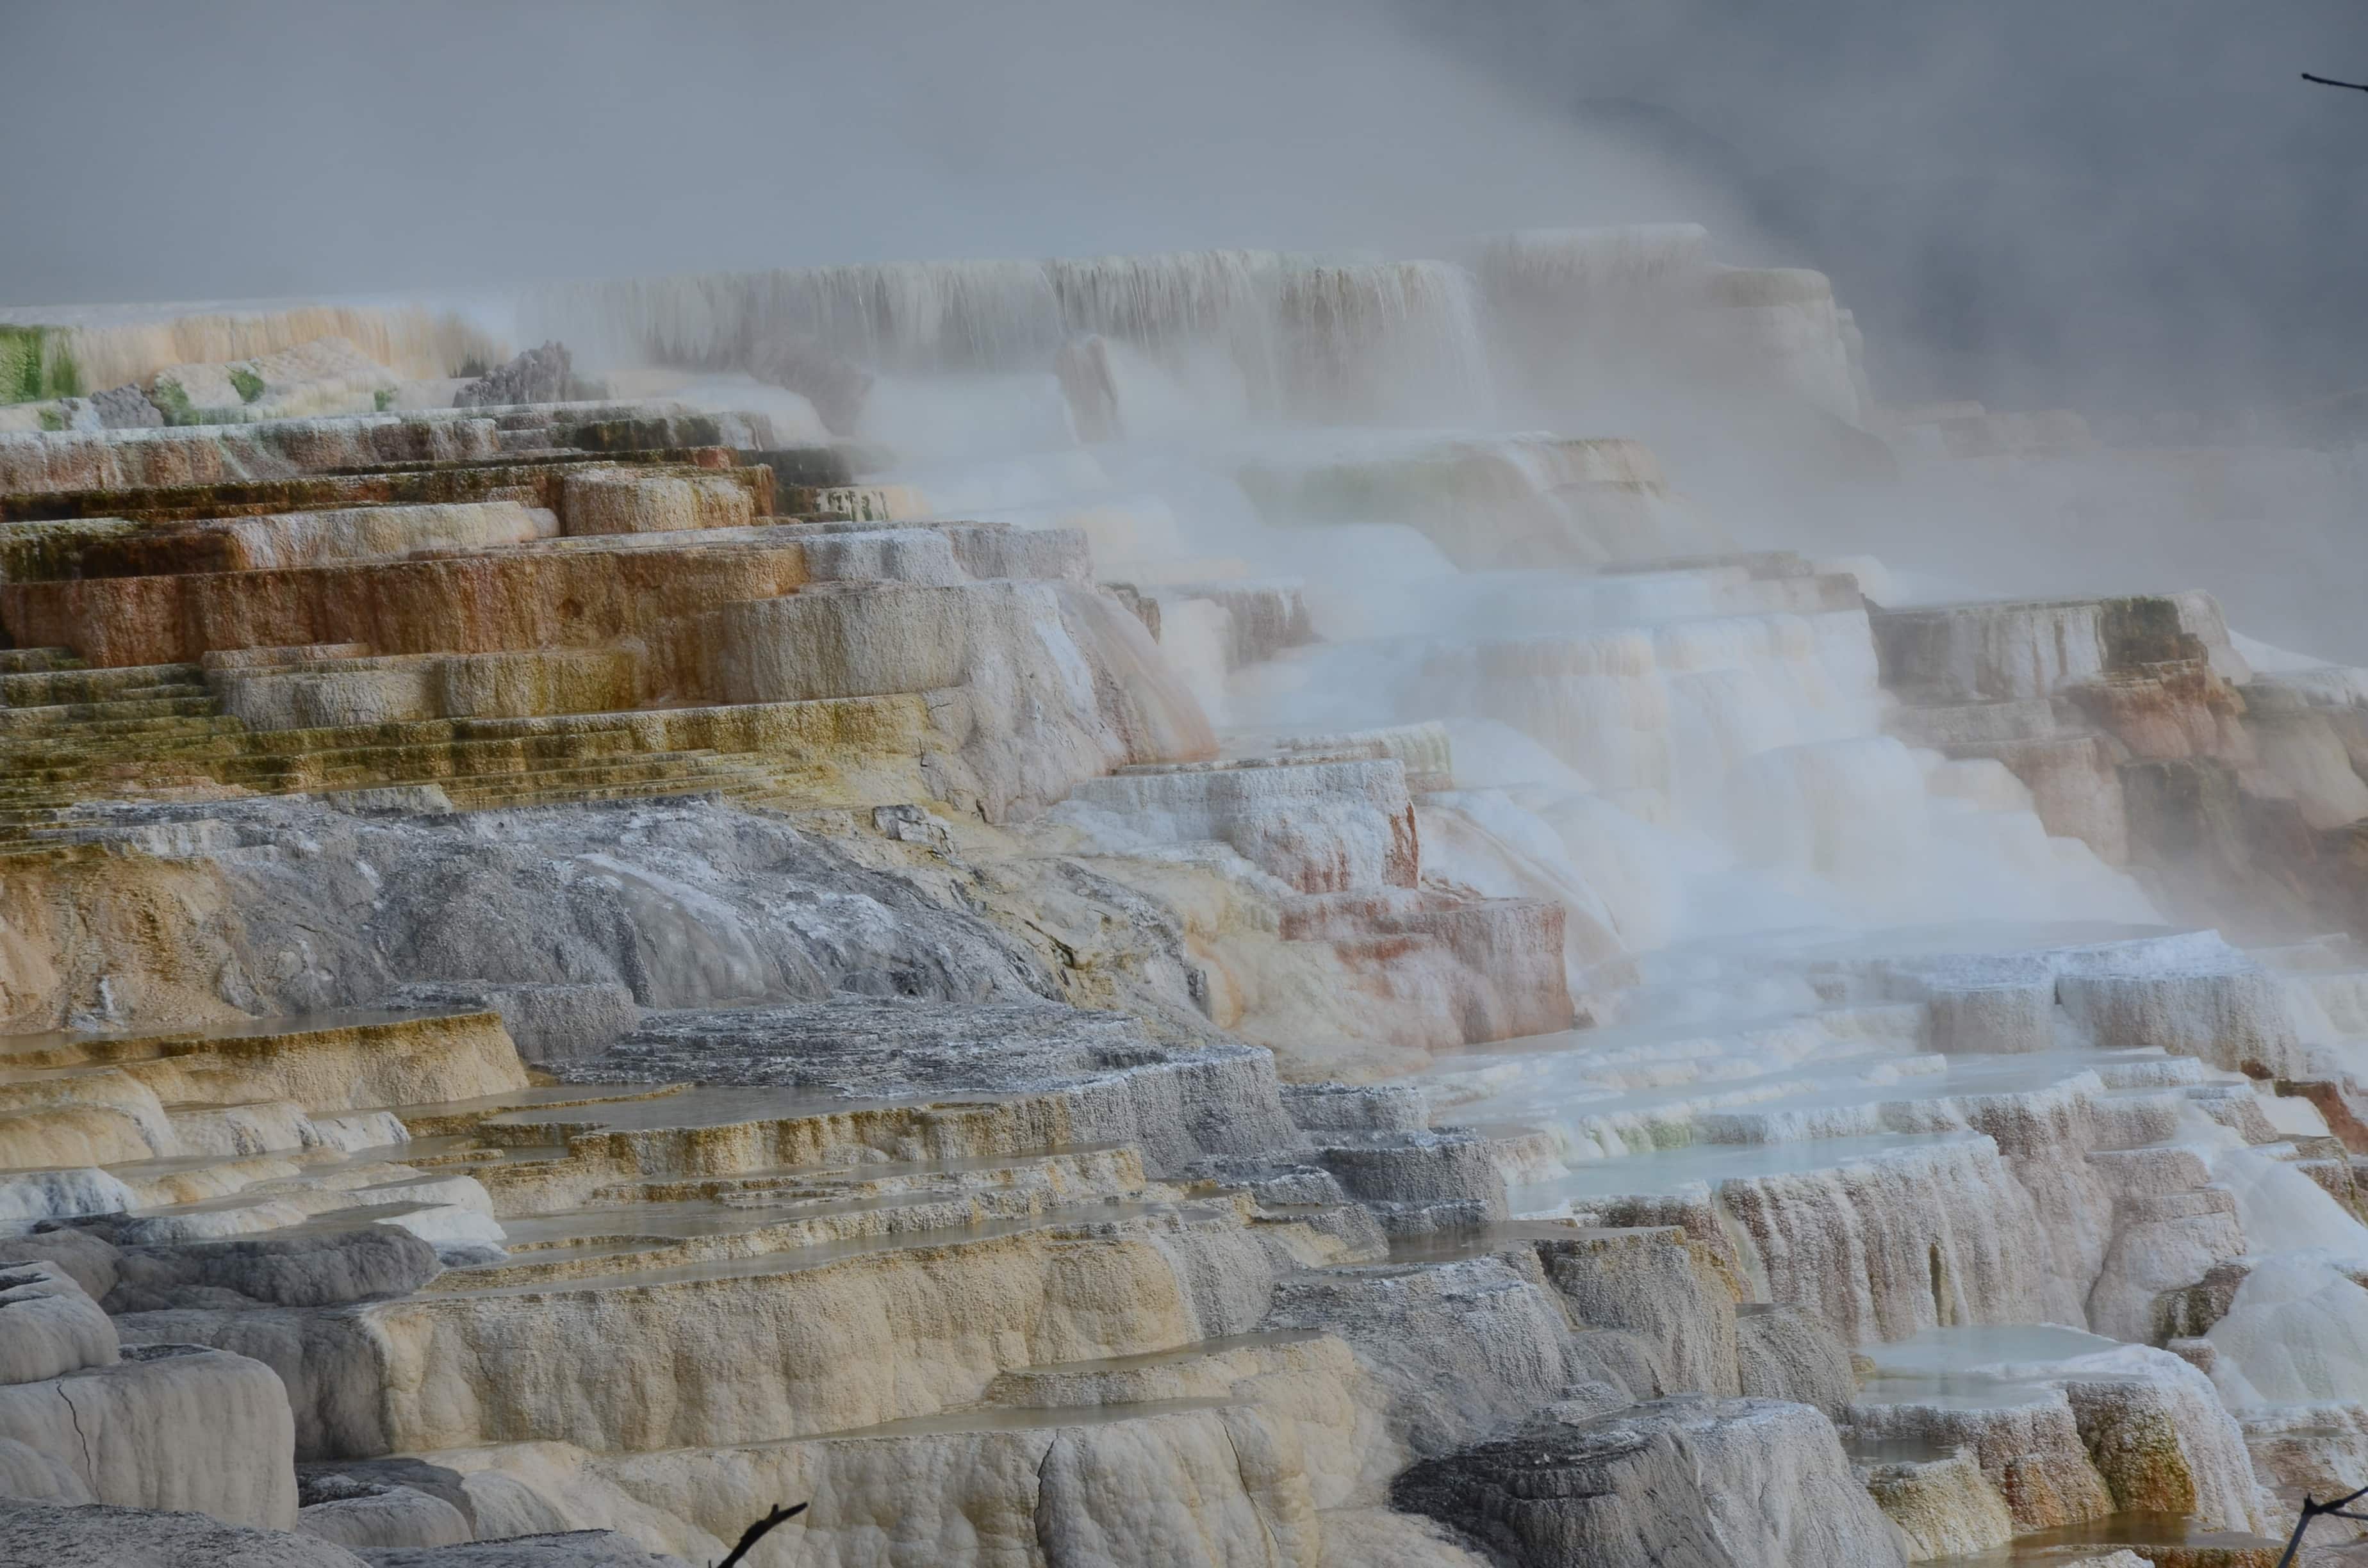 Canary Spring at Mammoth Hot Springs in Yellowstone National Park, Wyoming